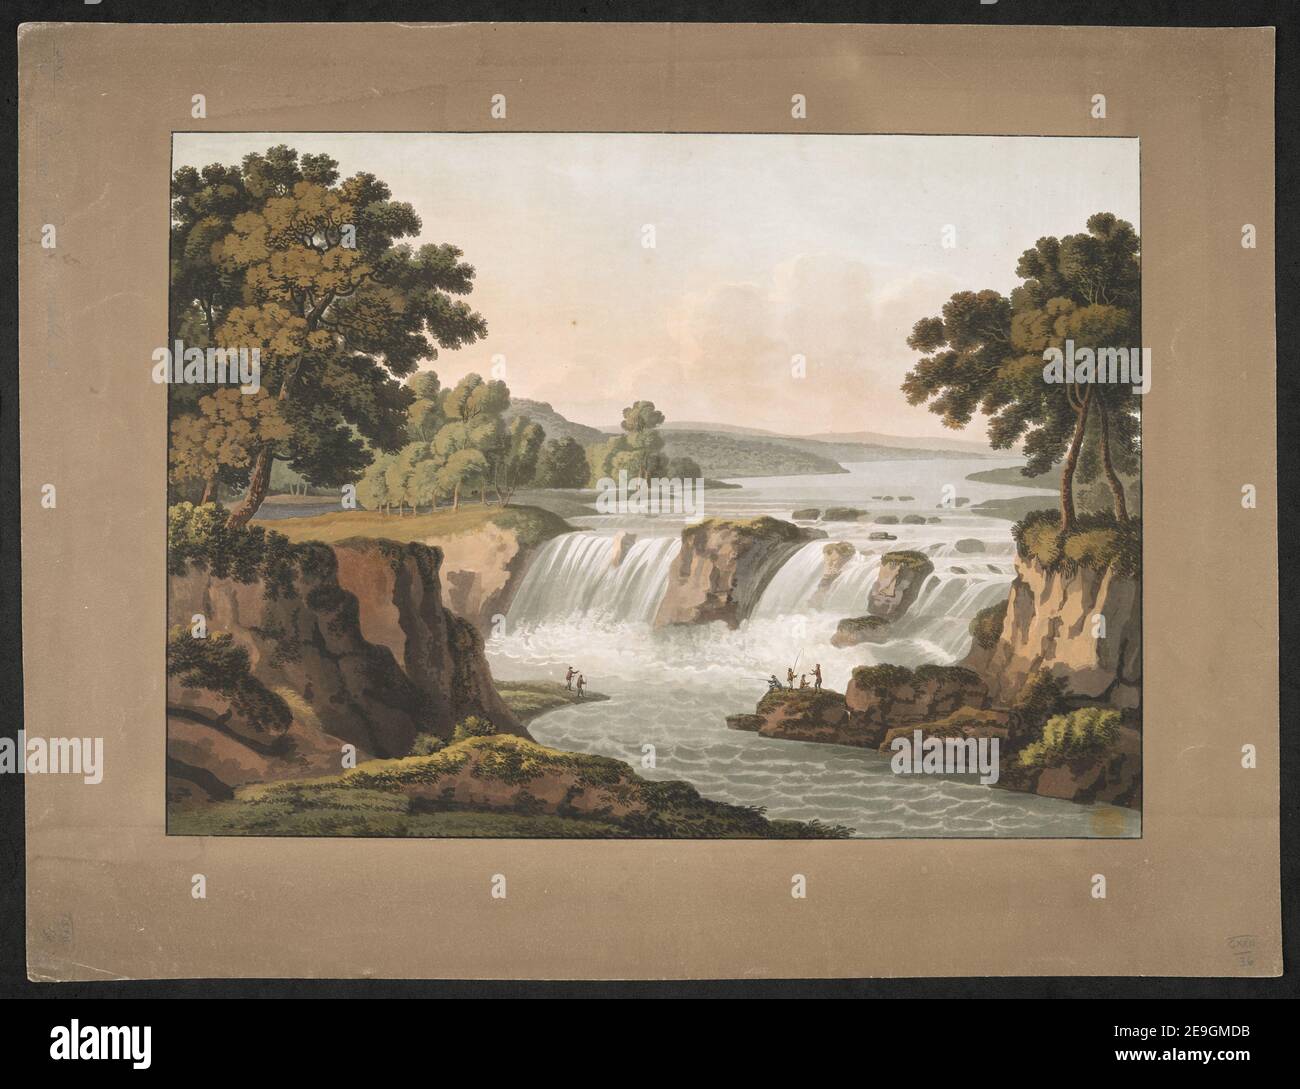 Great Falls of the Potomac . Author  Cartwright, Thomas 122.36.11.tab.PORTFOLIO. Place of publication: [London and Philadelphia] Publisher: [Atkins , Nightingale] Date of publication: [January 1 1802]  Item type: 1 print Medium: hand-coloured aquatint and etching Dimensions: sheet 41.6 x 57.8 cm (trimmed below platemark), on support 56.3 x 74.2 cm  Former owner: George III, King of Great Britain, 1738-1820 Stock Photo